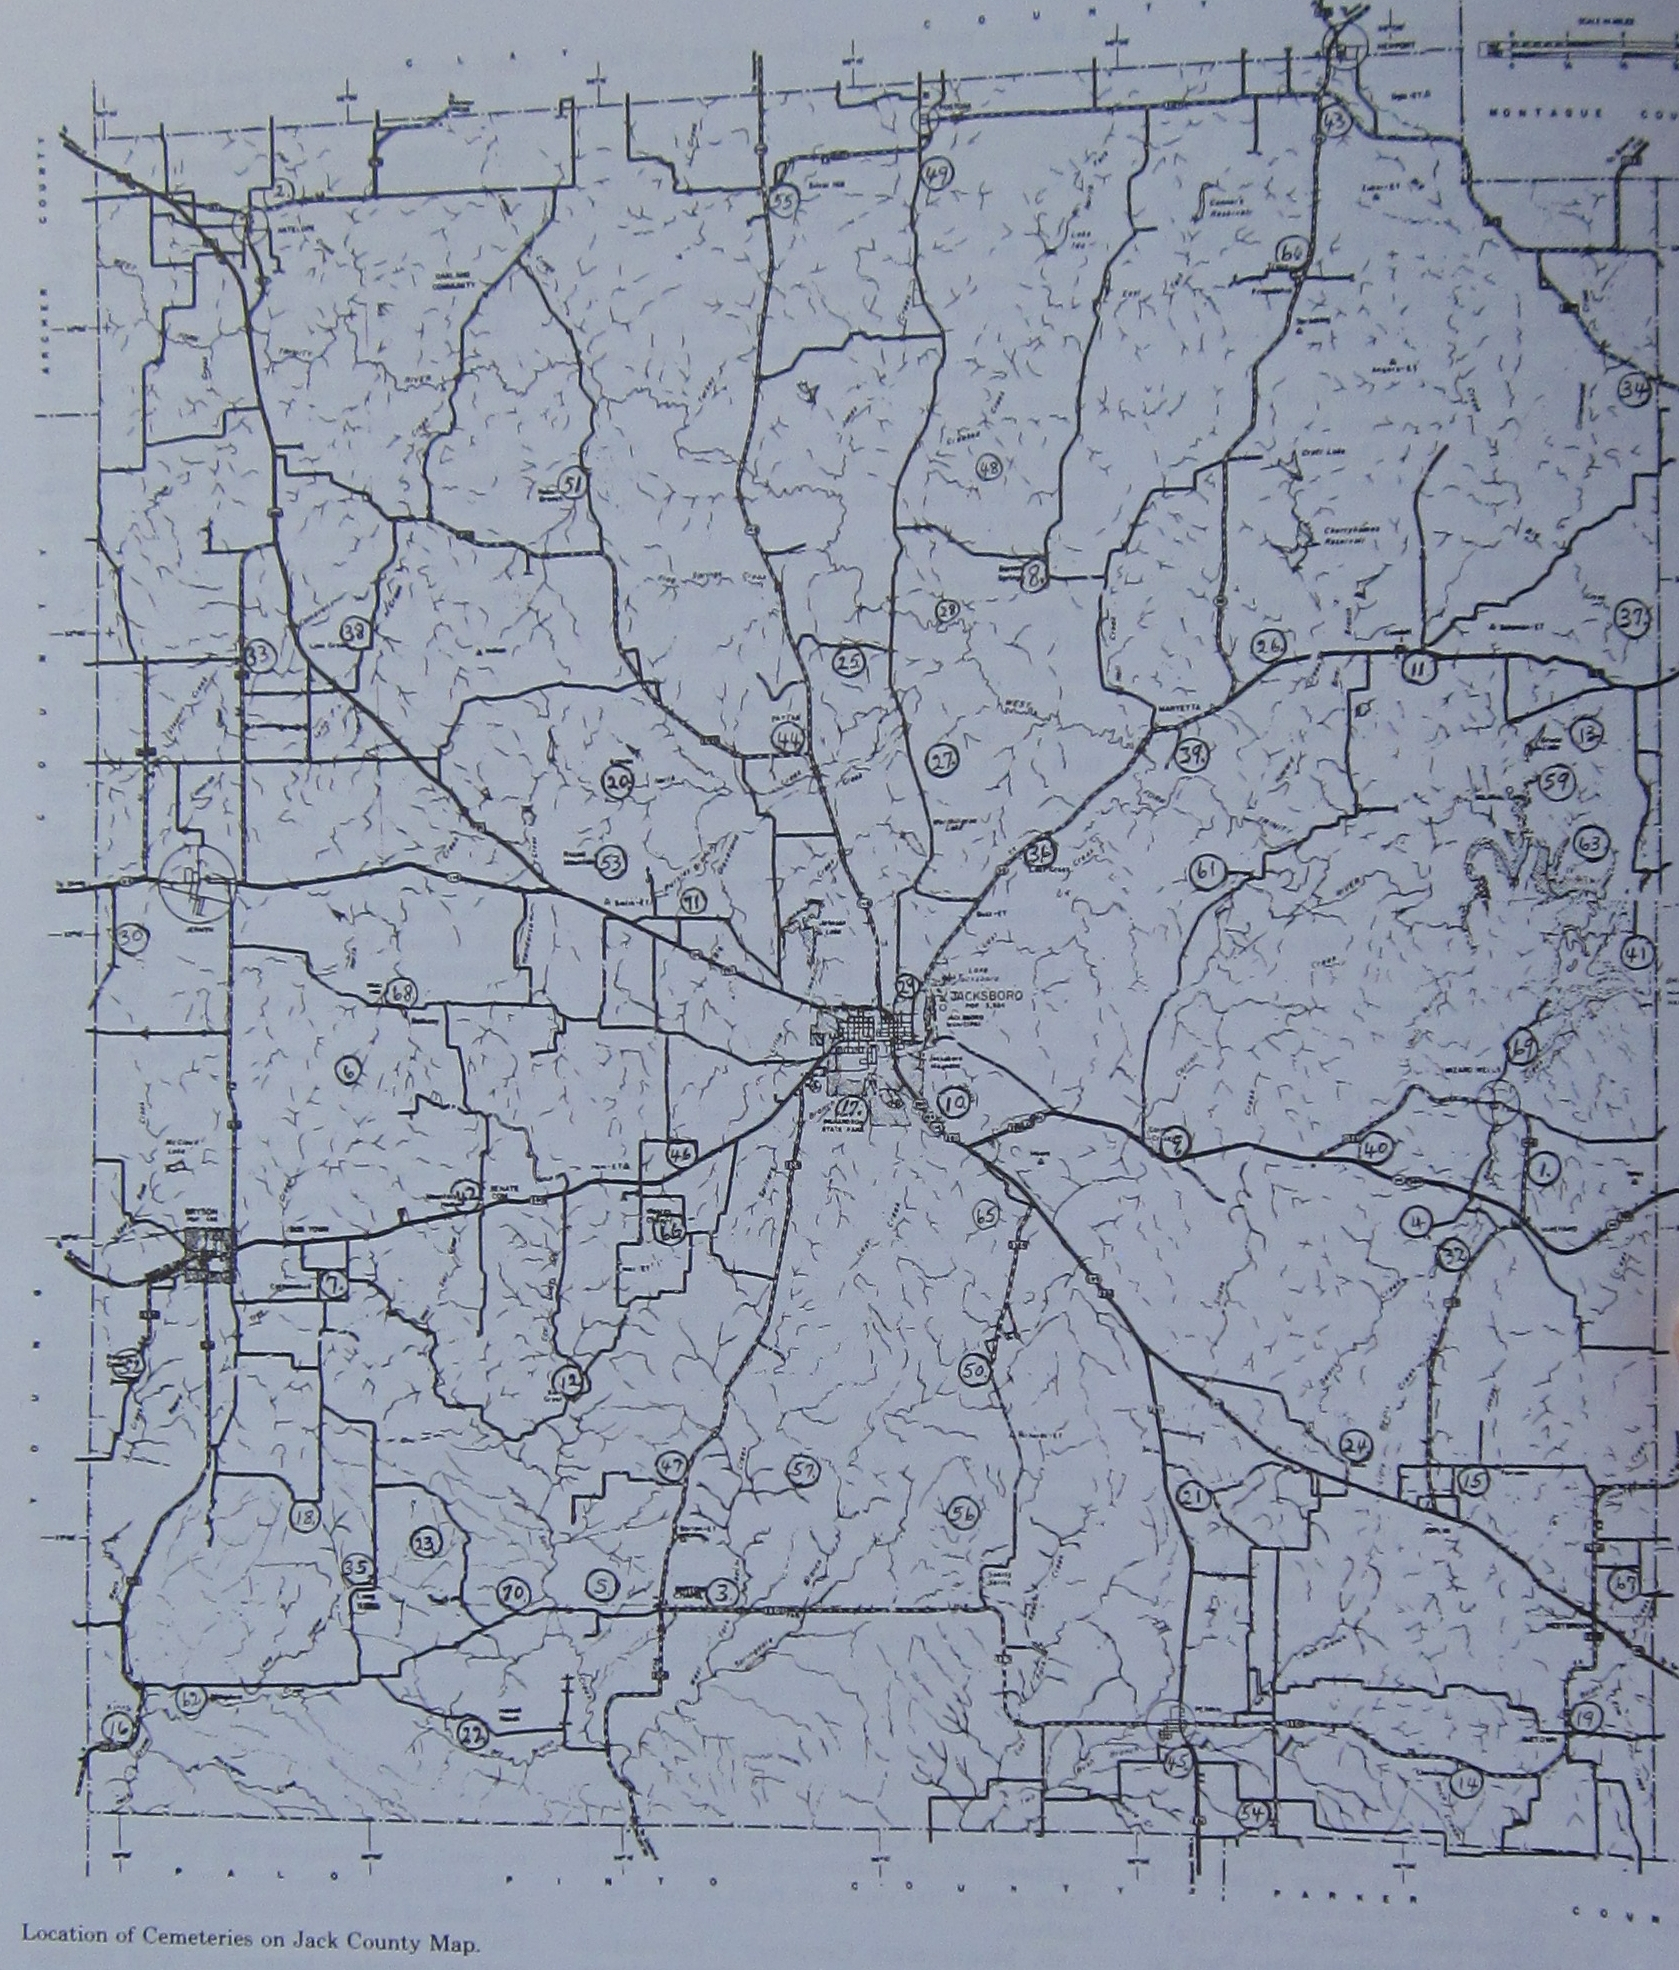 Cemeteries Of Jack County Tx - Jack County Texas Map